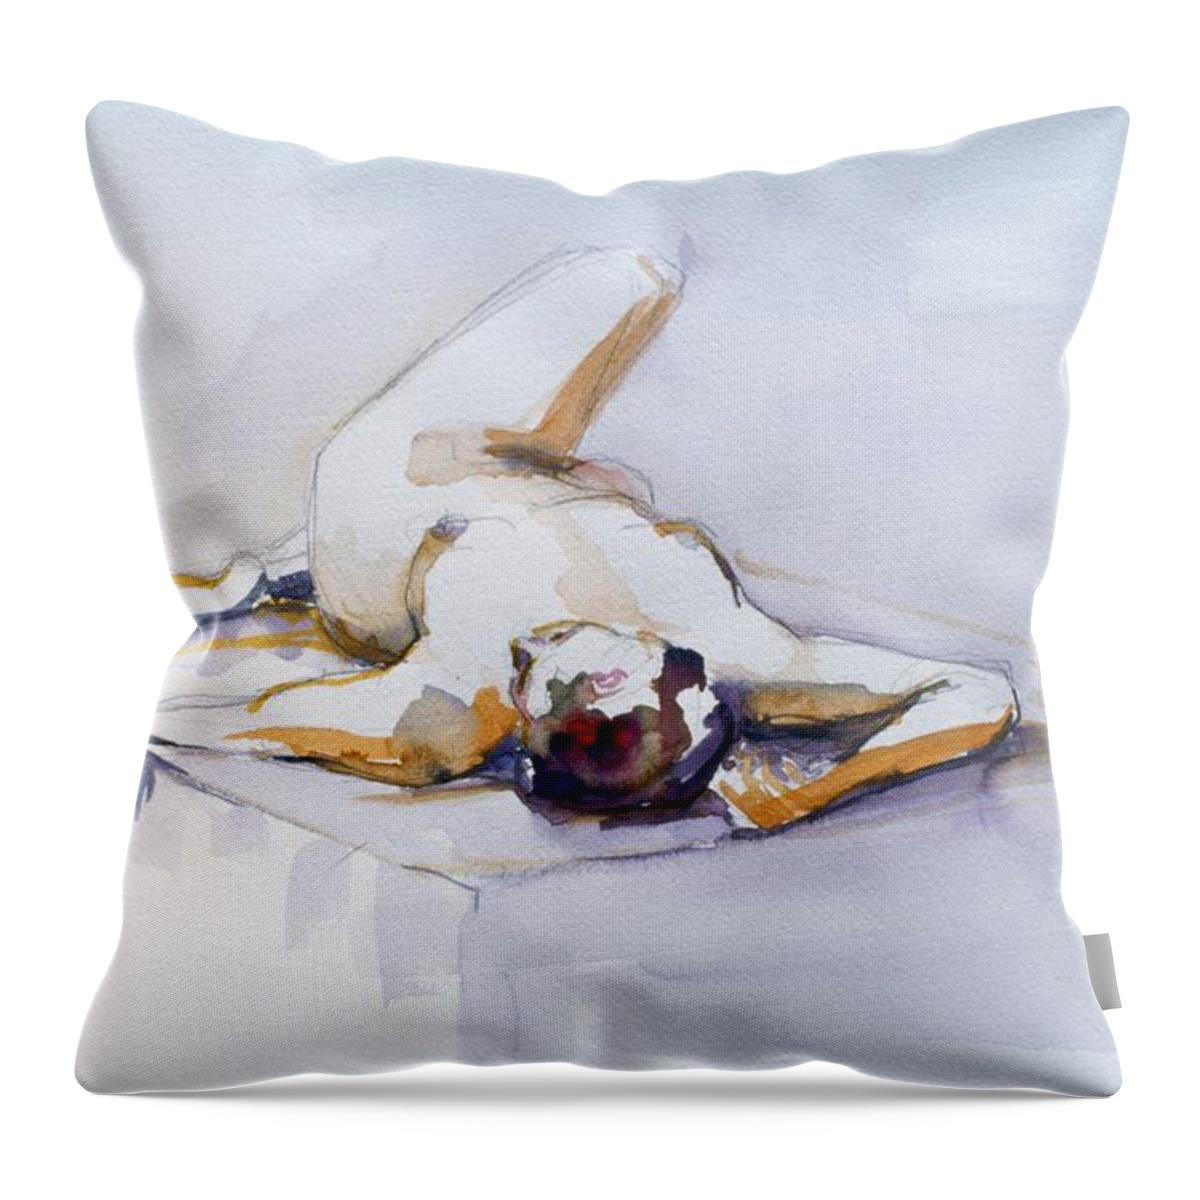 Full Body Throw Pillow featuring the painting Reclining study 6 by Barbara Pease